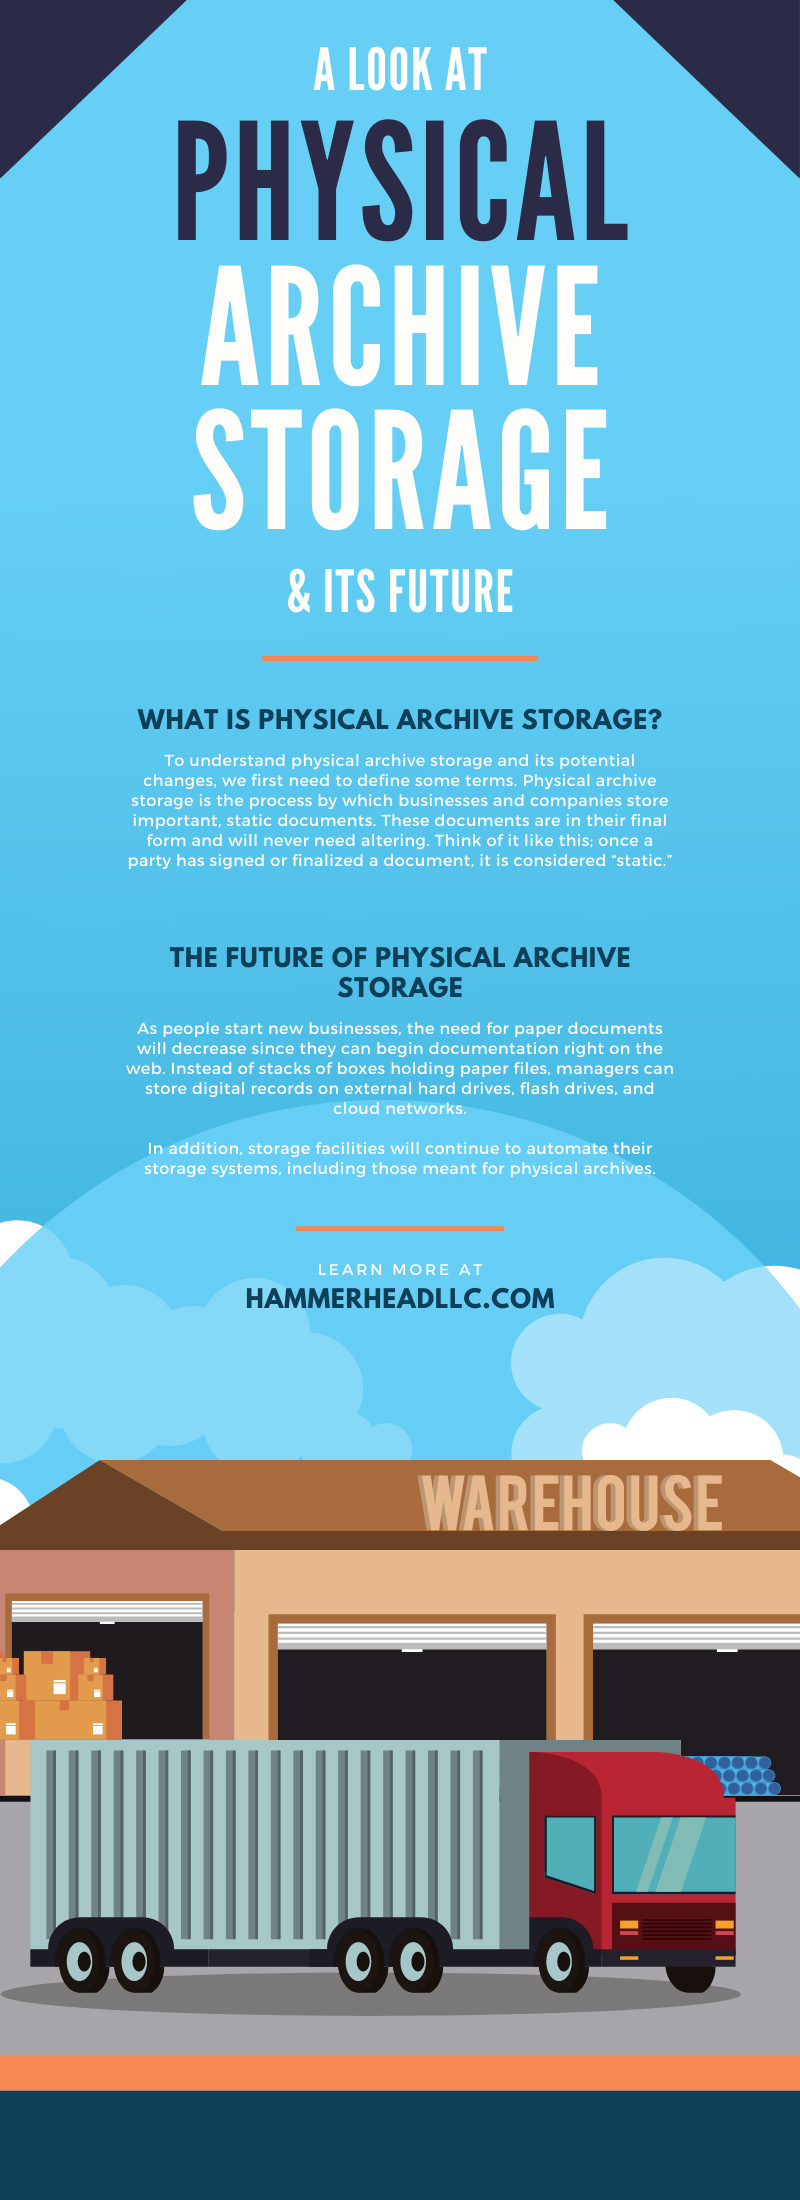 A Look at Physical Archive Storage & Its Future